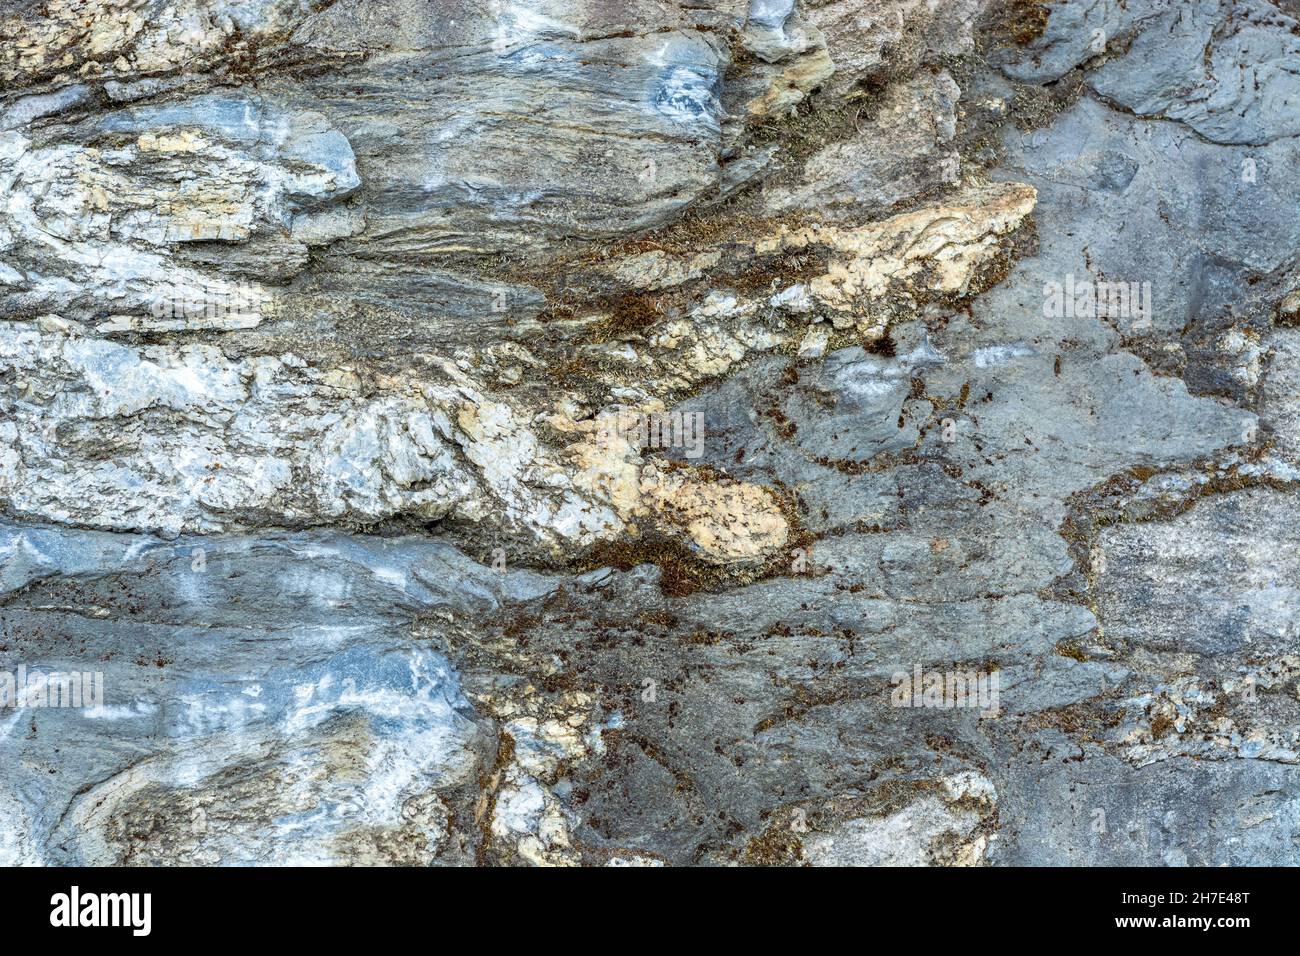 Surface of a marble stone lying on the road in the Ruskeala Mountain Park for use as an abstract background and textures. Stock Photo